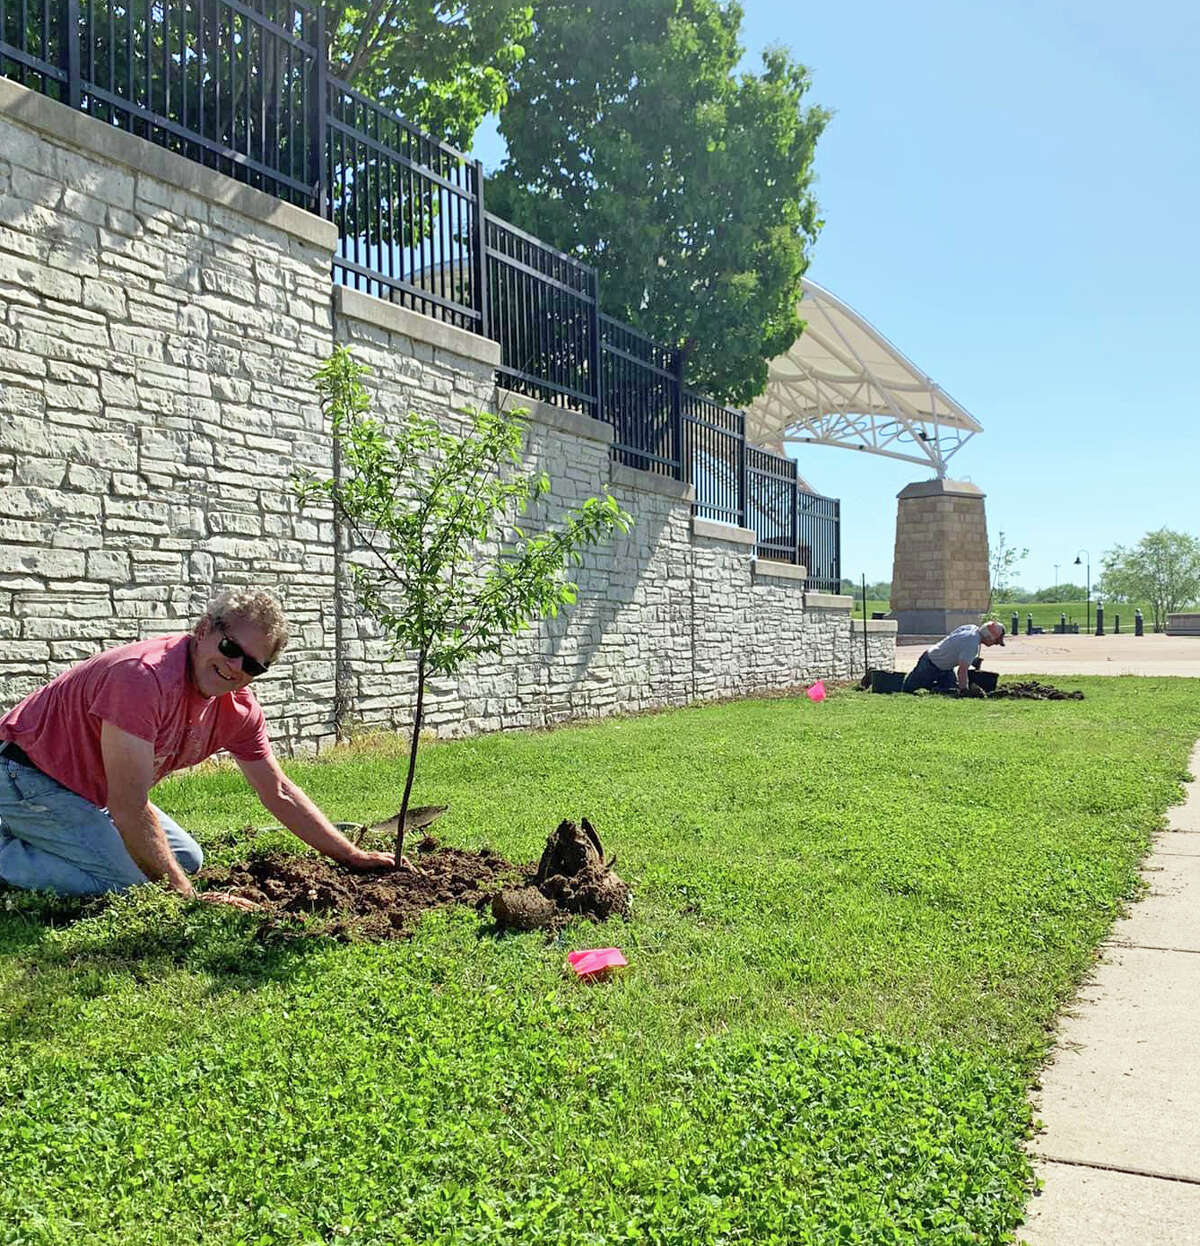 Volunteers plant trees at Riverfront Park in Alton Illinois on May 7. Another tree planting will take place at Riverfront Park and the Broadway Corridor, Landmarks Blvd., between Piasa St. and Henry St., in Alton from 9 a.m.-noon Wednesday, May 25.